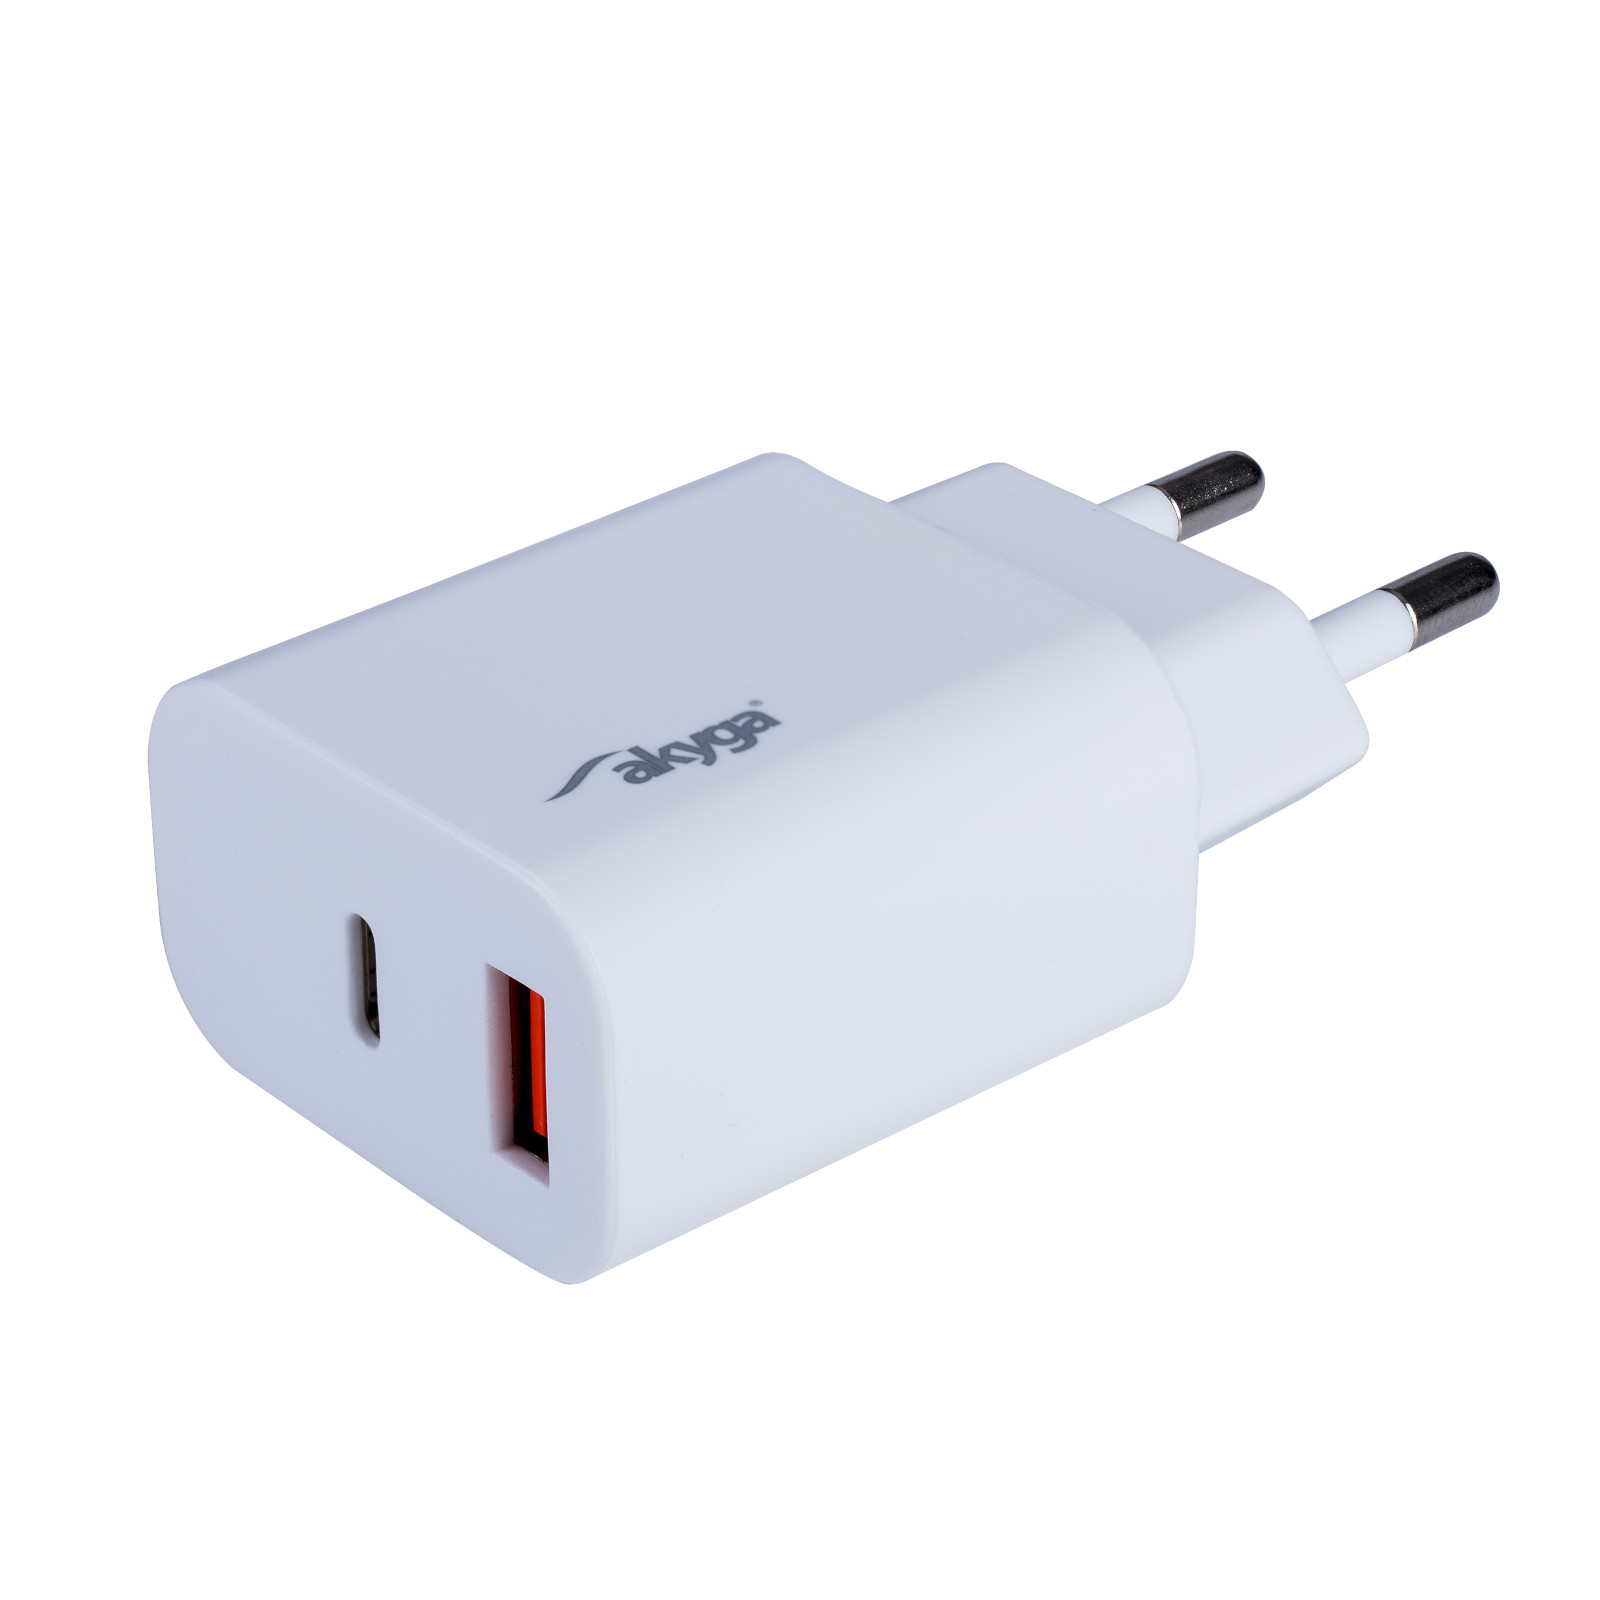 Main image USB Charger AK-CH-12 USB-A + USB-C PD 5-12V / max. 3A 18W Quick Charge 3.0